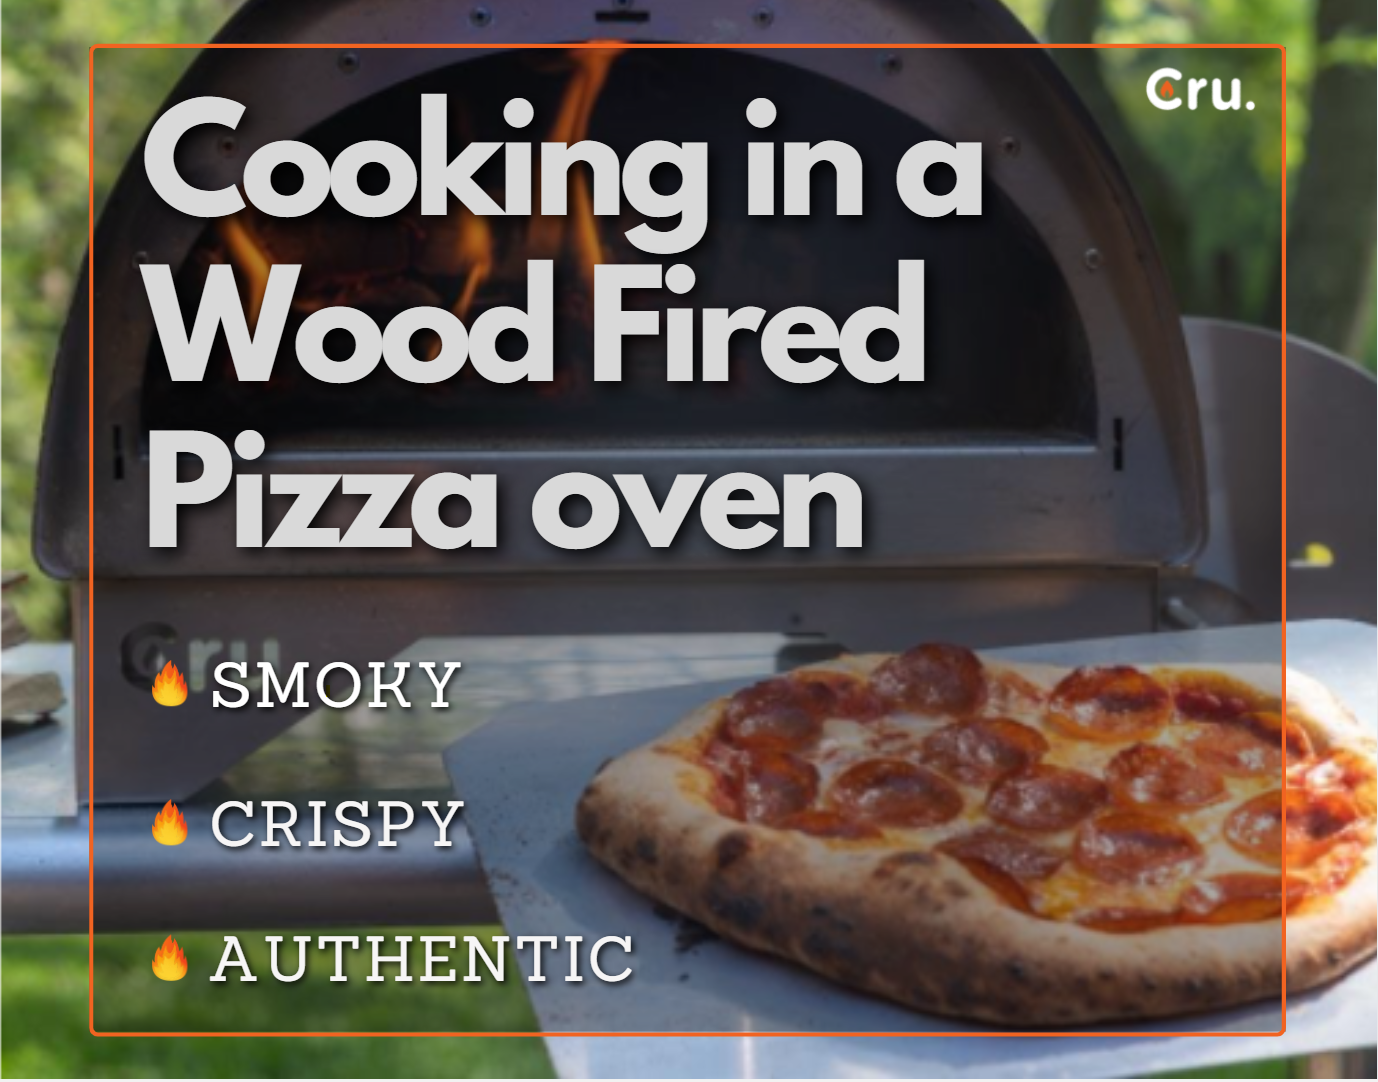 How Does a Wood Fired Pizza Oven Work?